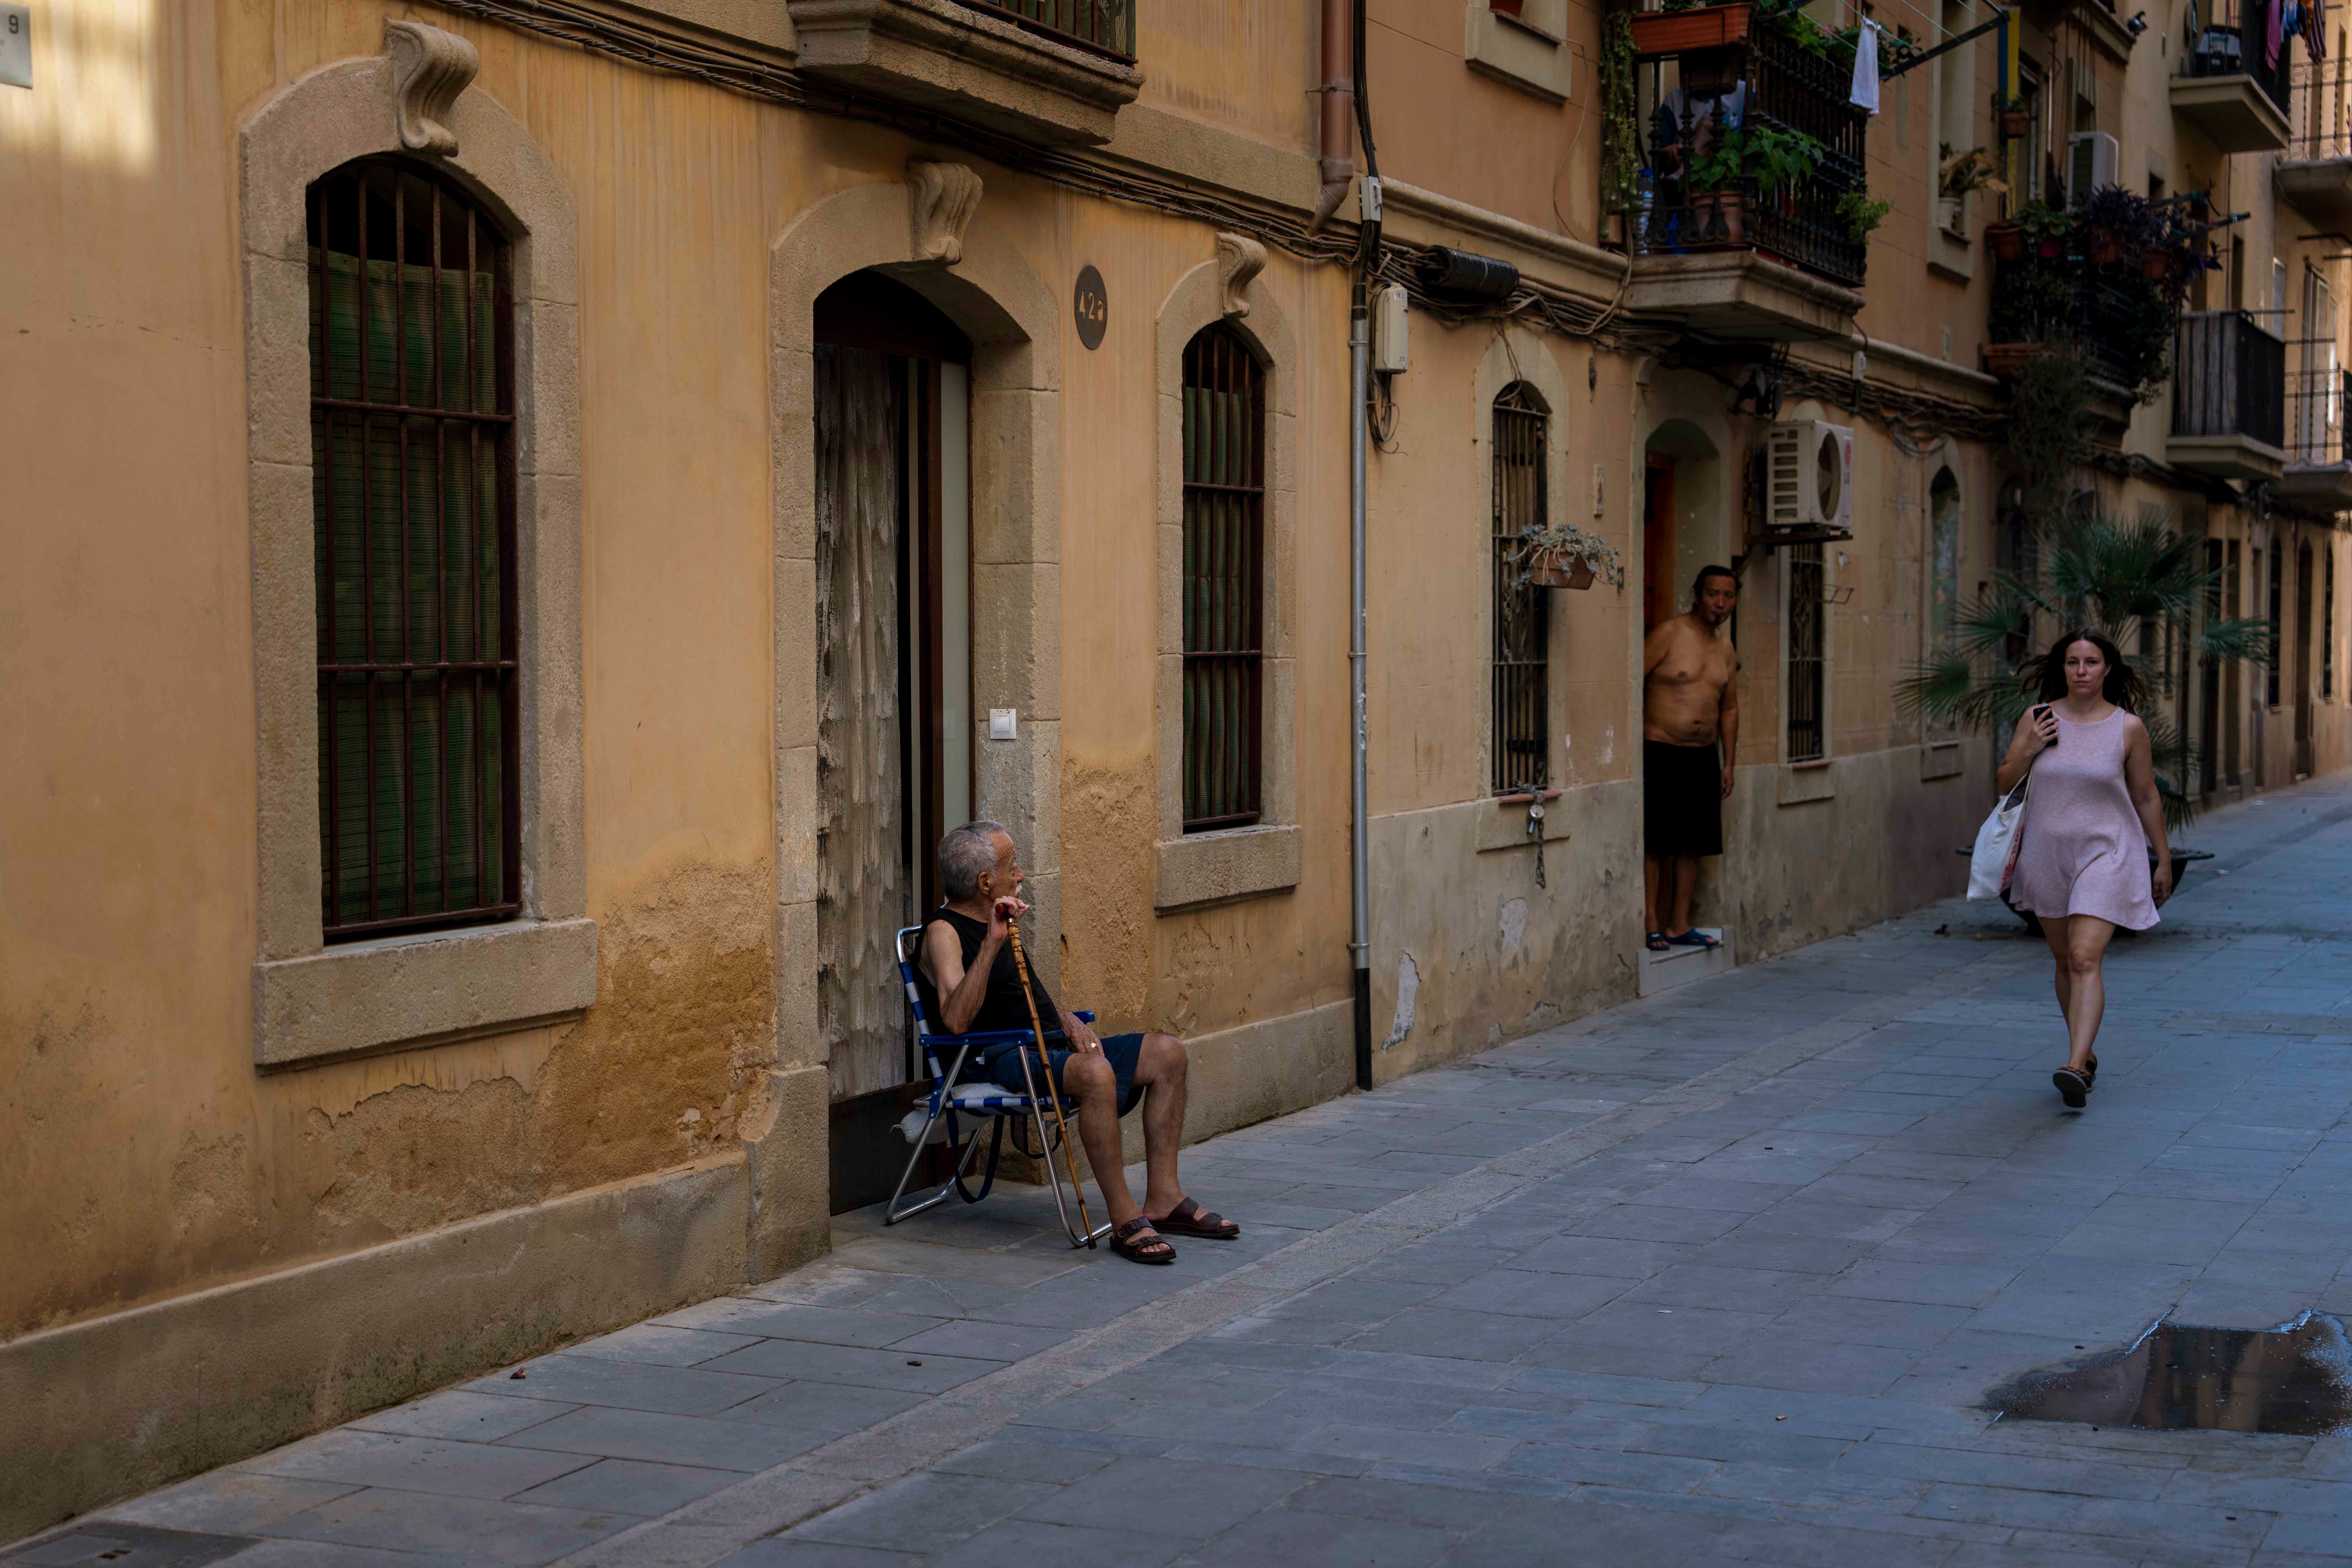 An older man sits outside his house